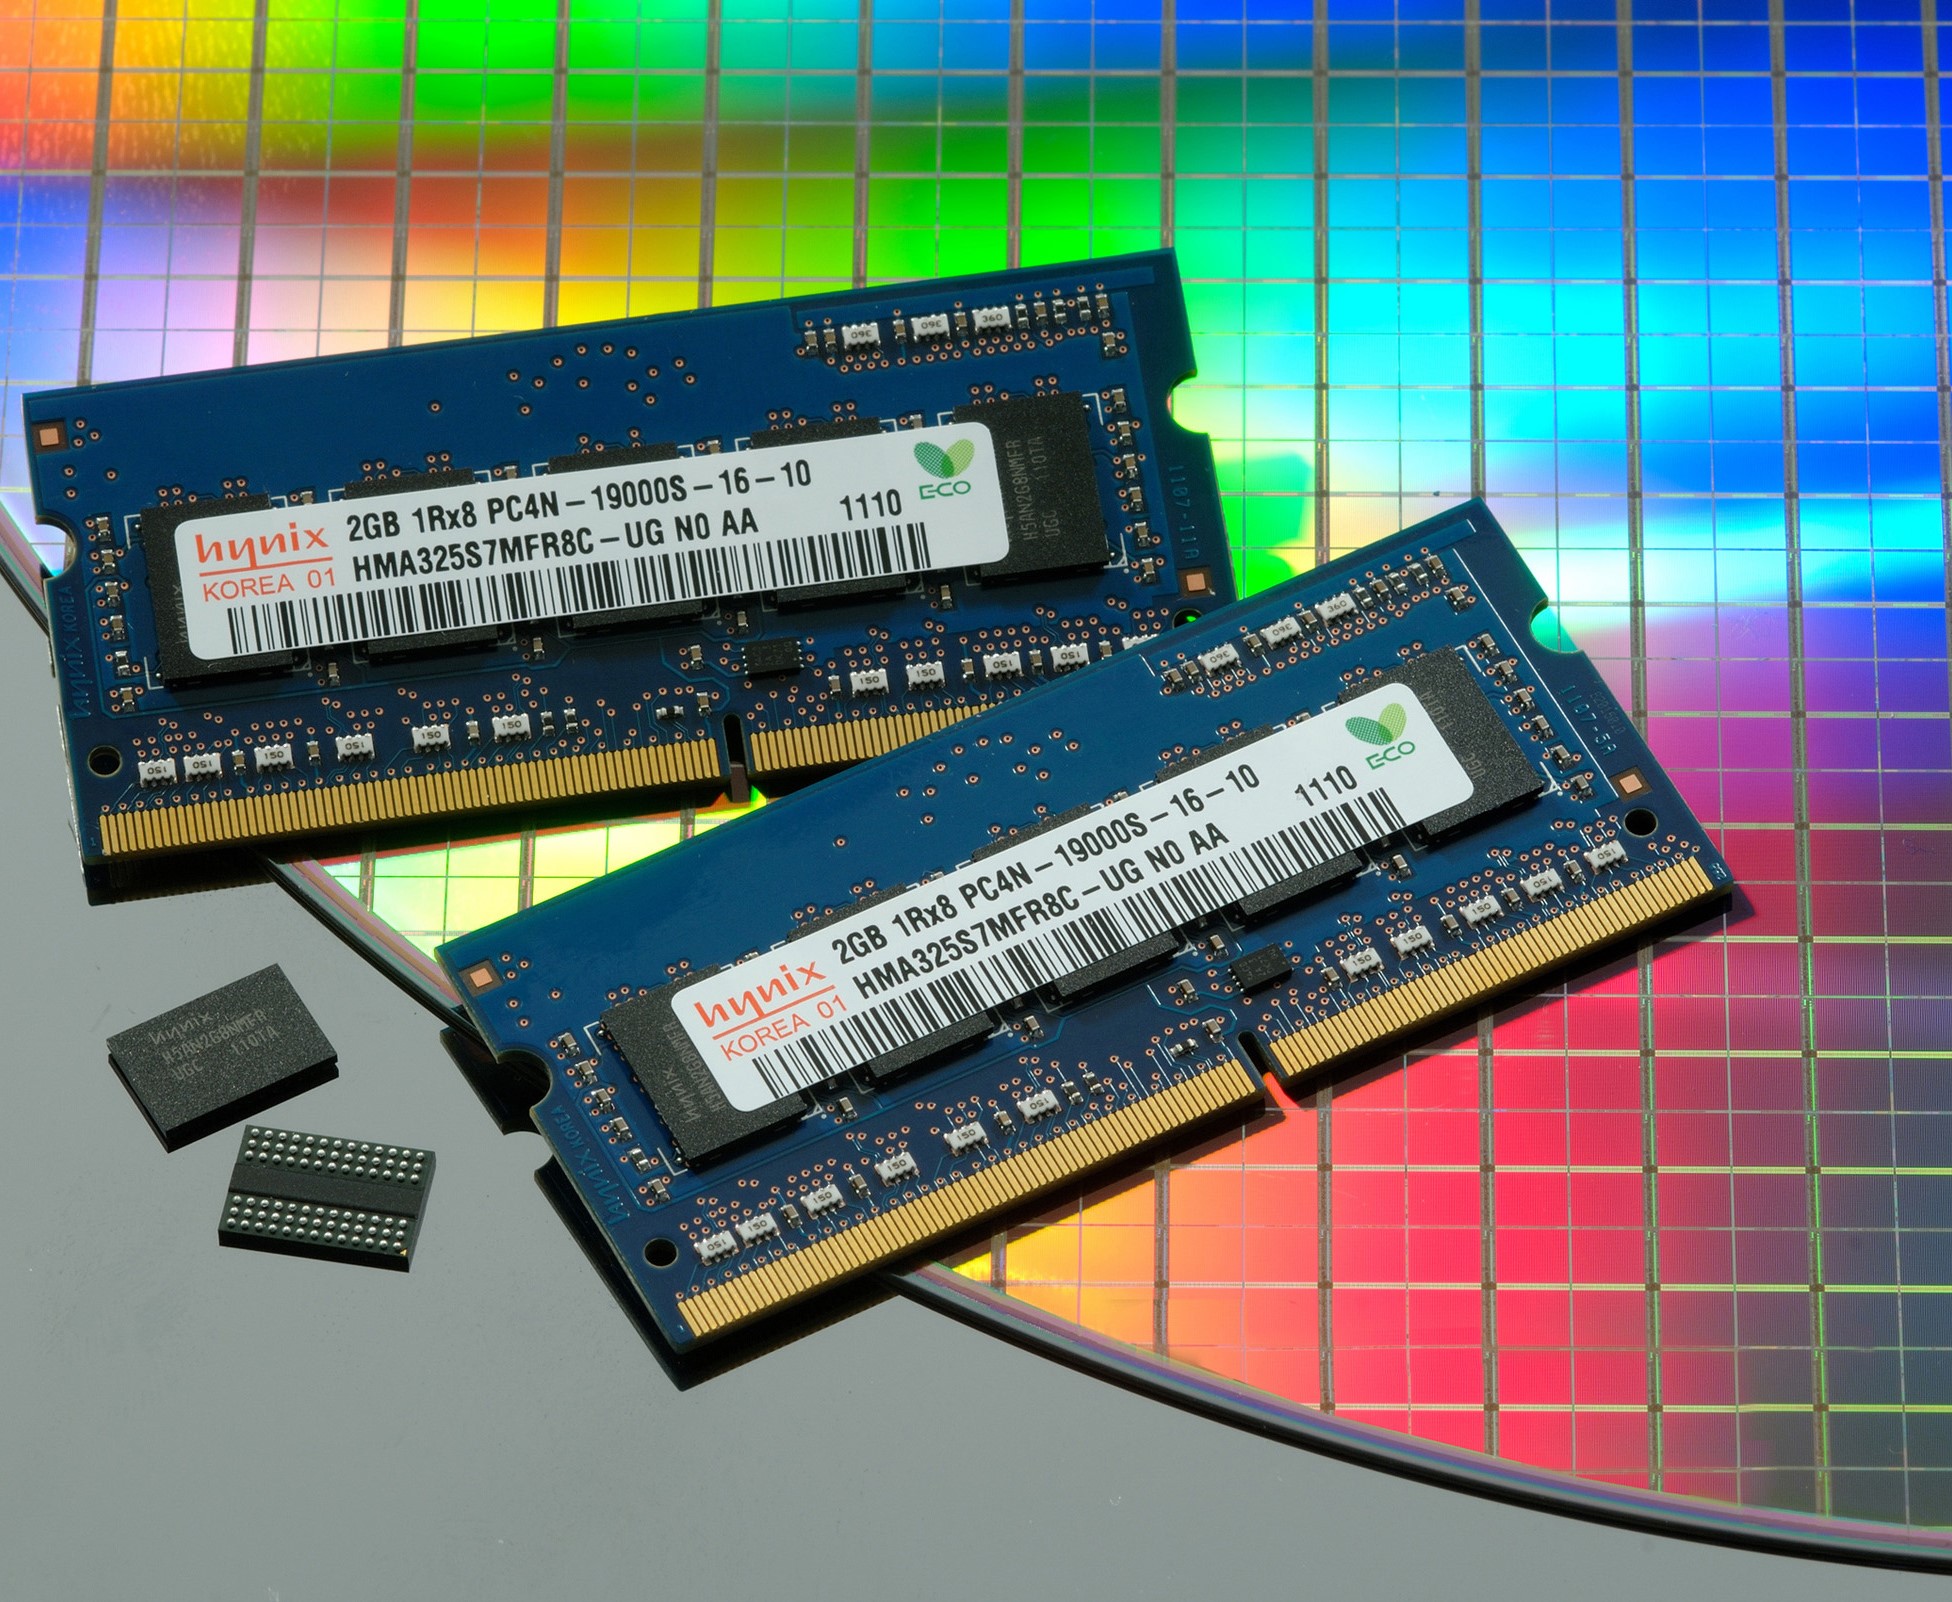 South Korea / Japan trade war could lead to DRAM memory price spikes